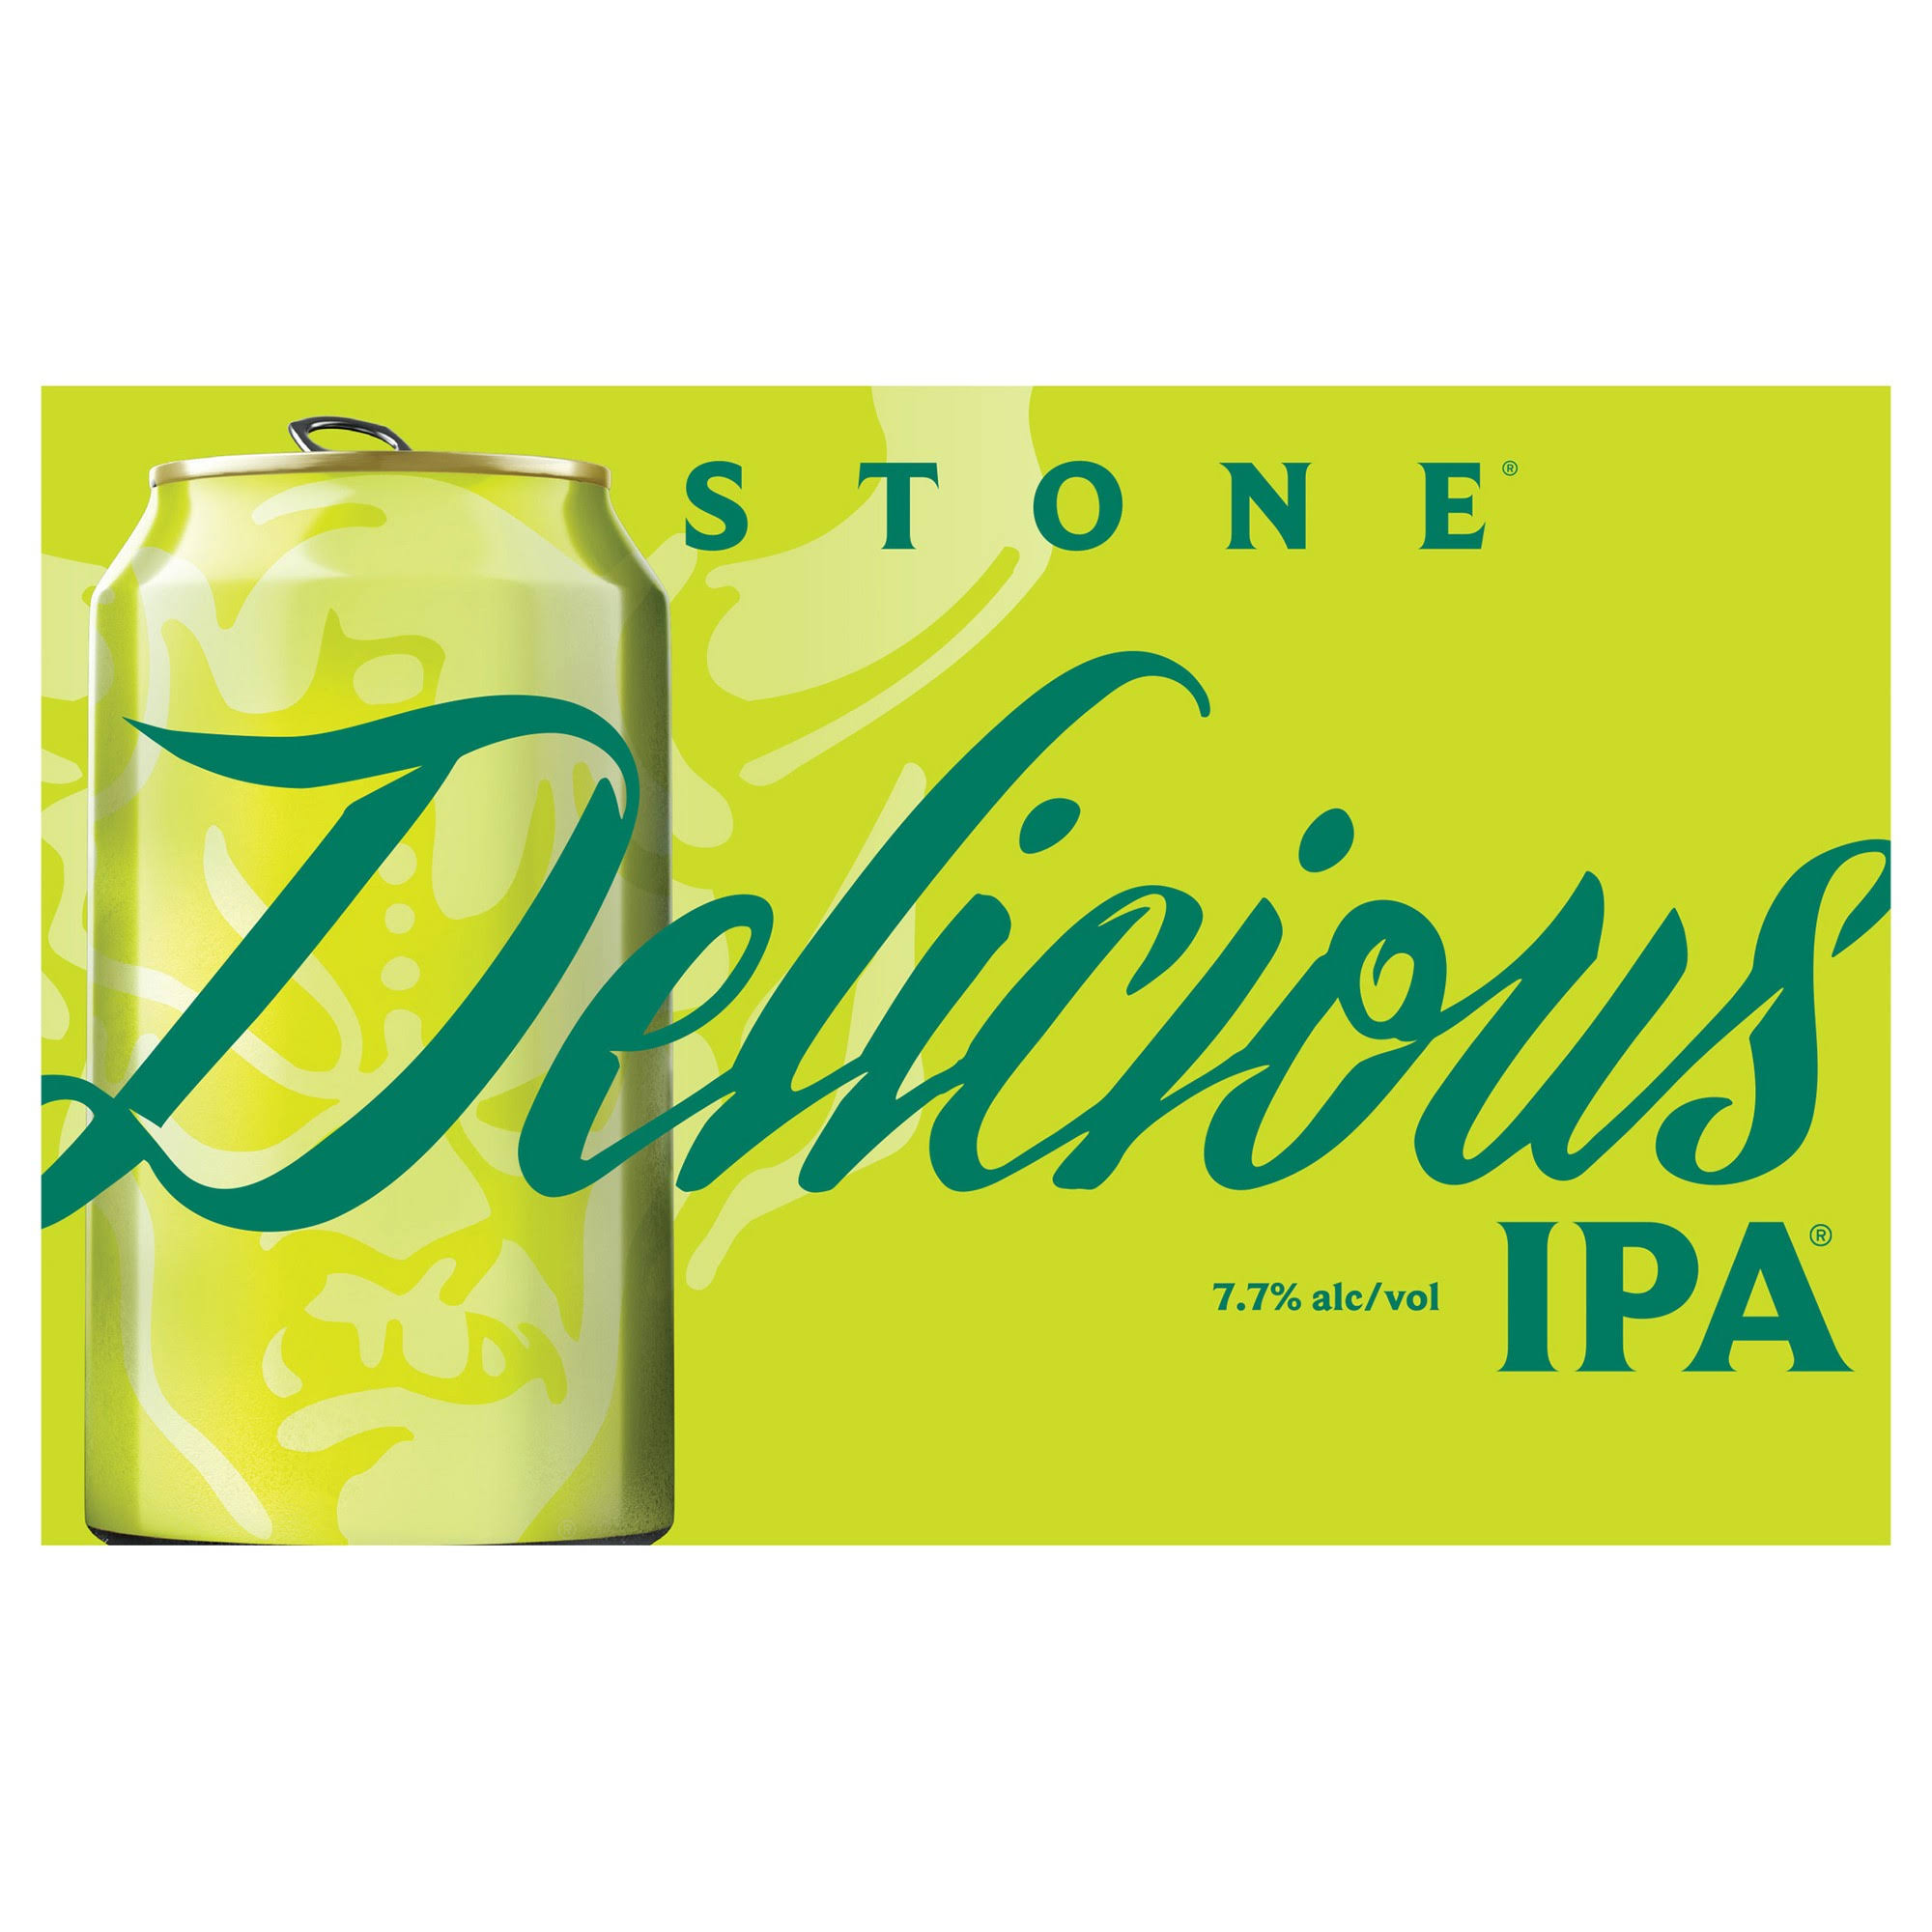 Stone Beer, Delicious IPA - 6 pack, 12 fl oz cans